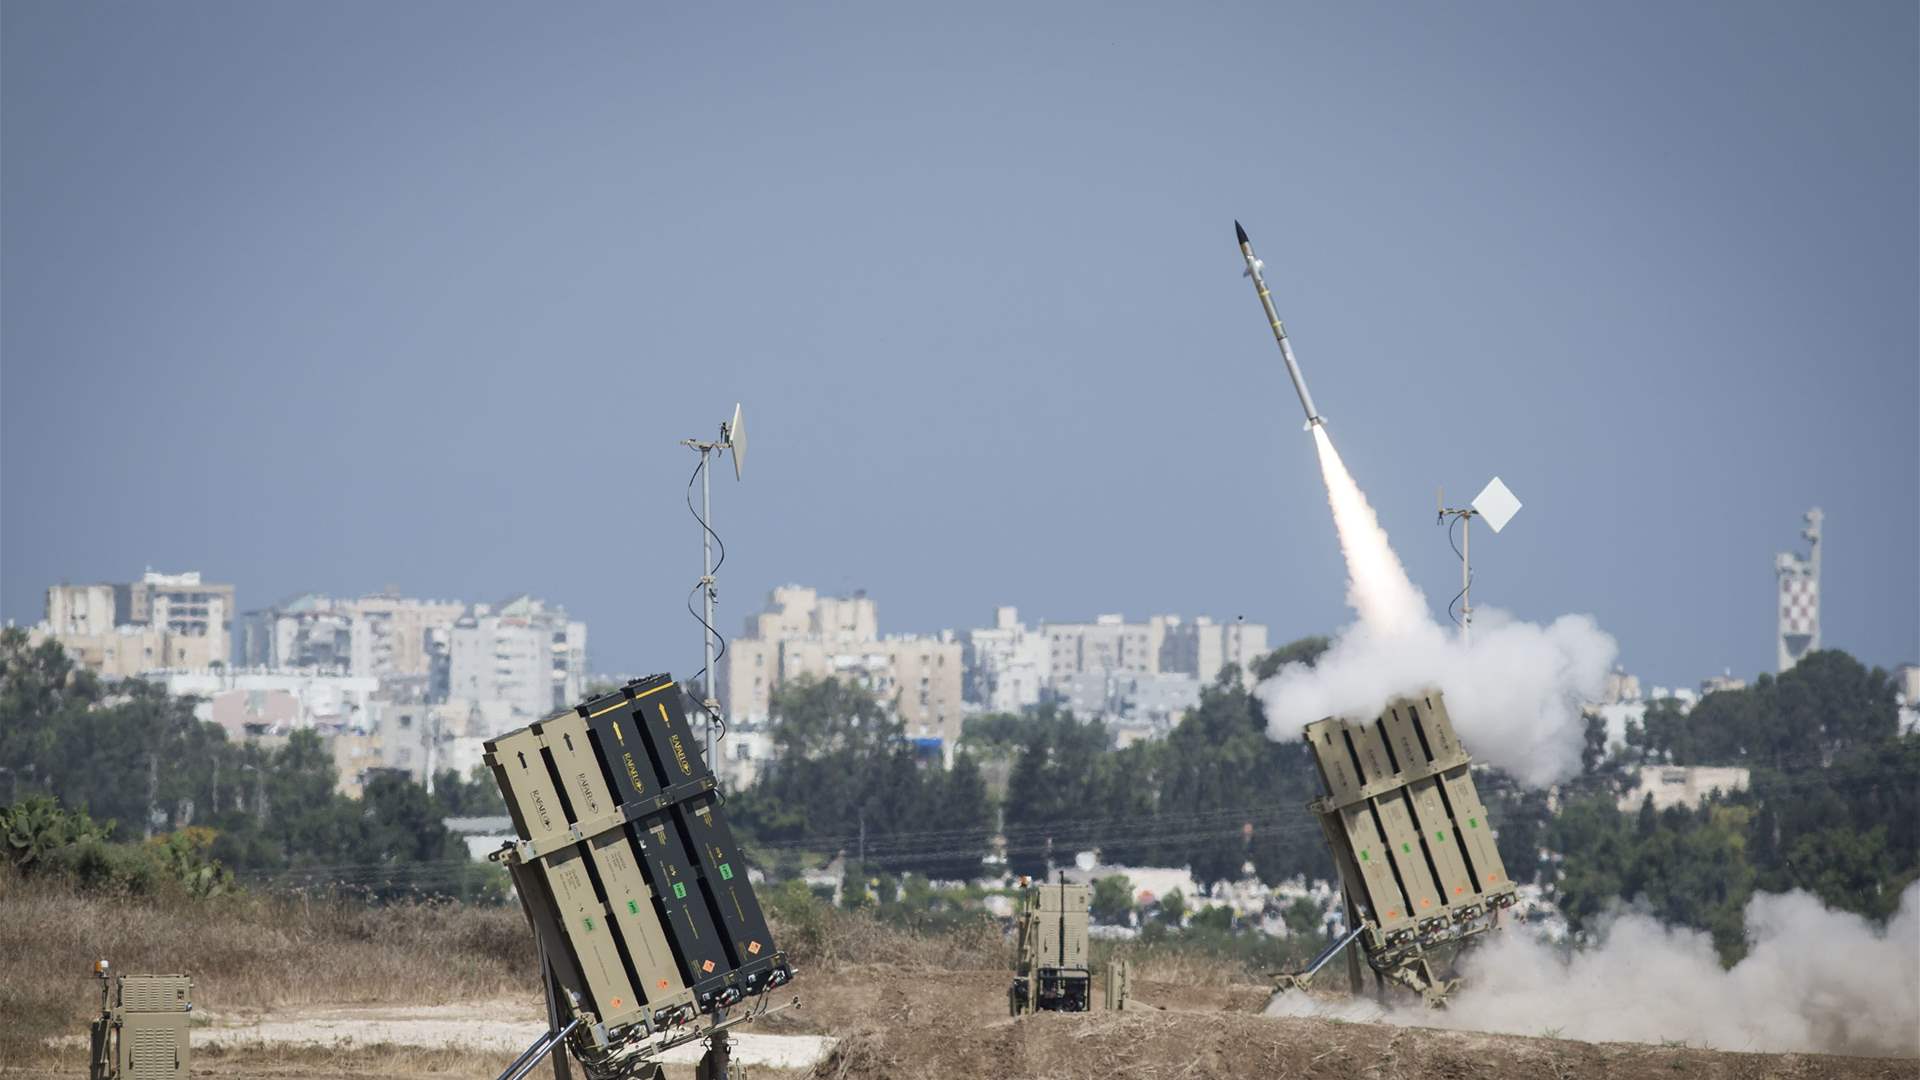 Military alert in northern Israel: Concerns mount over Iran&#39;s proxies as Israeli defense systems prove inadequate